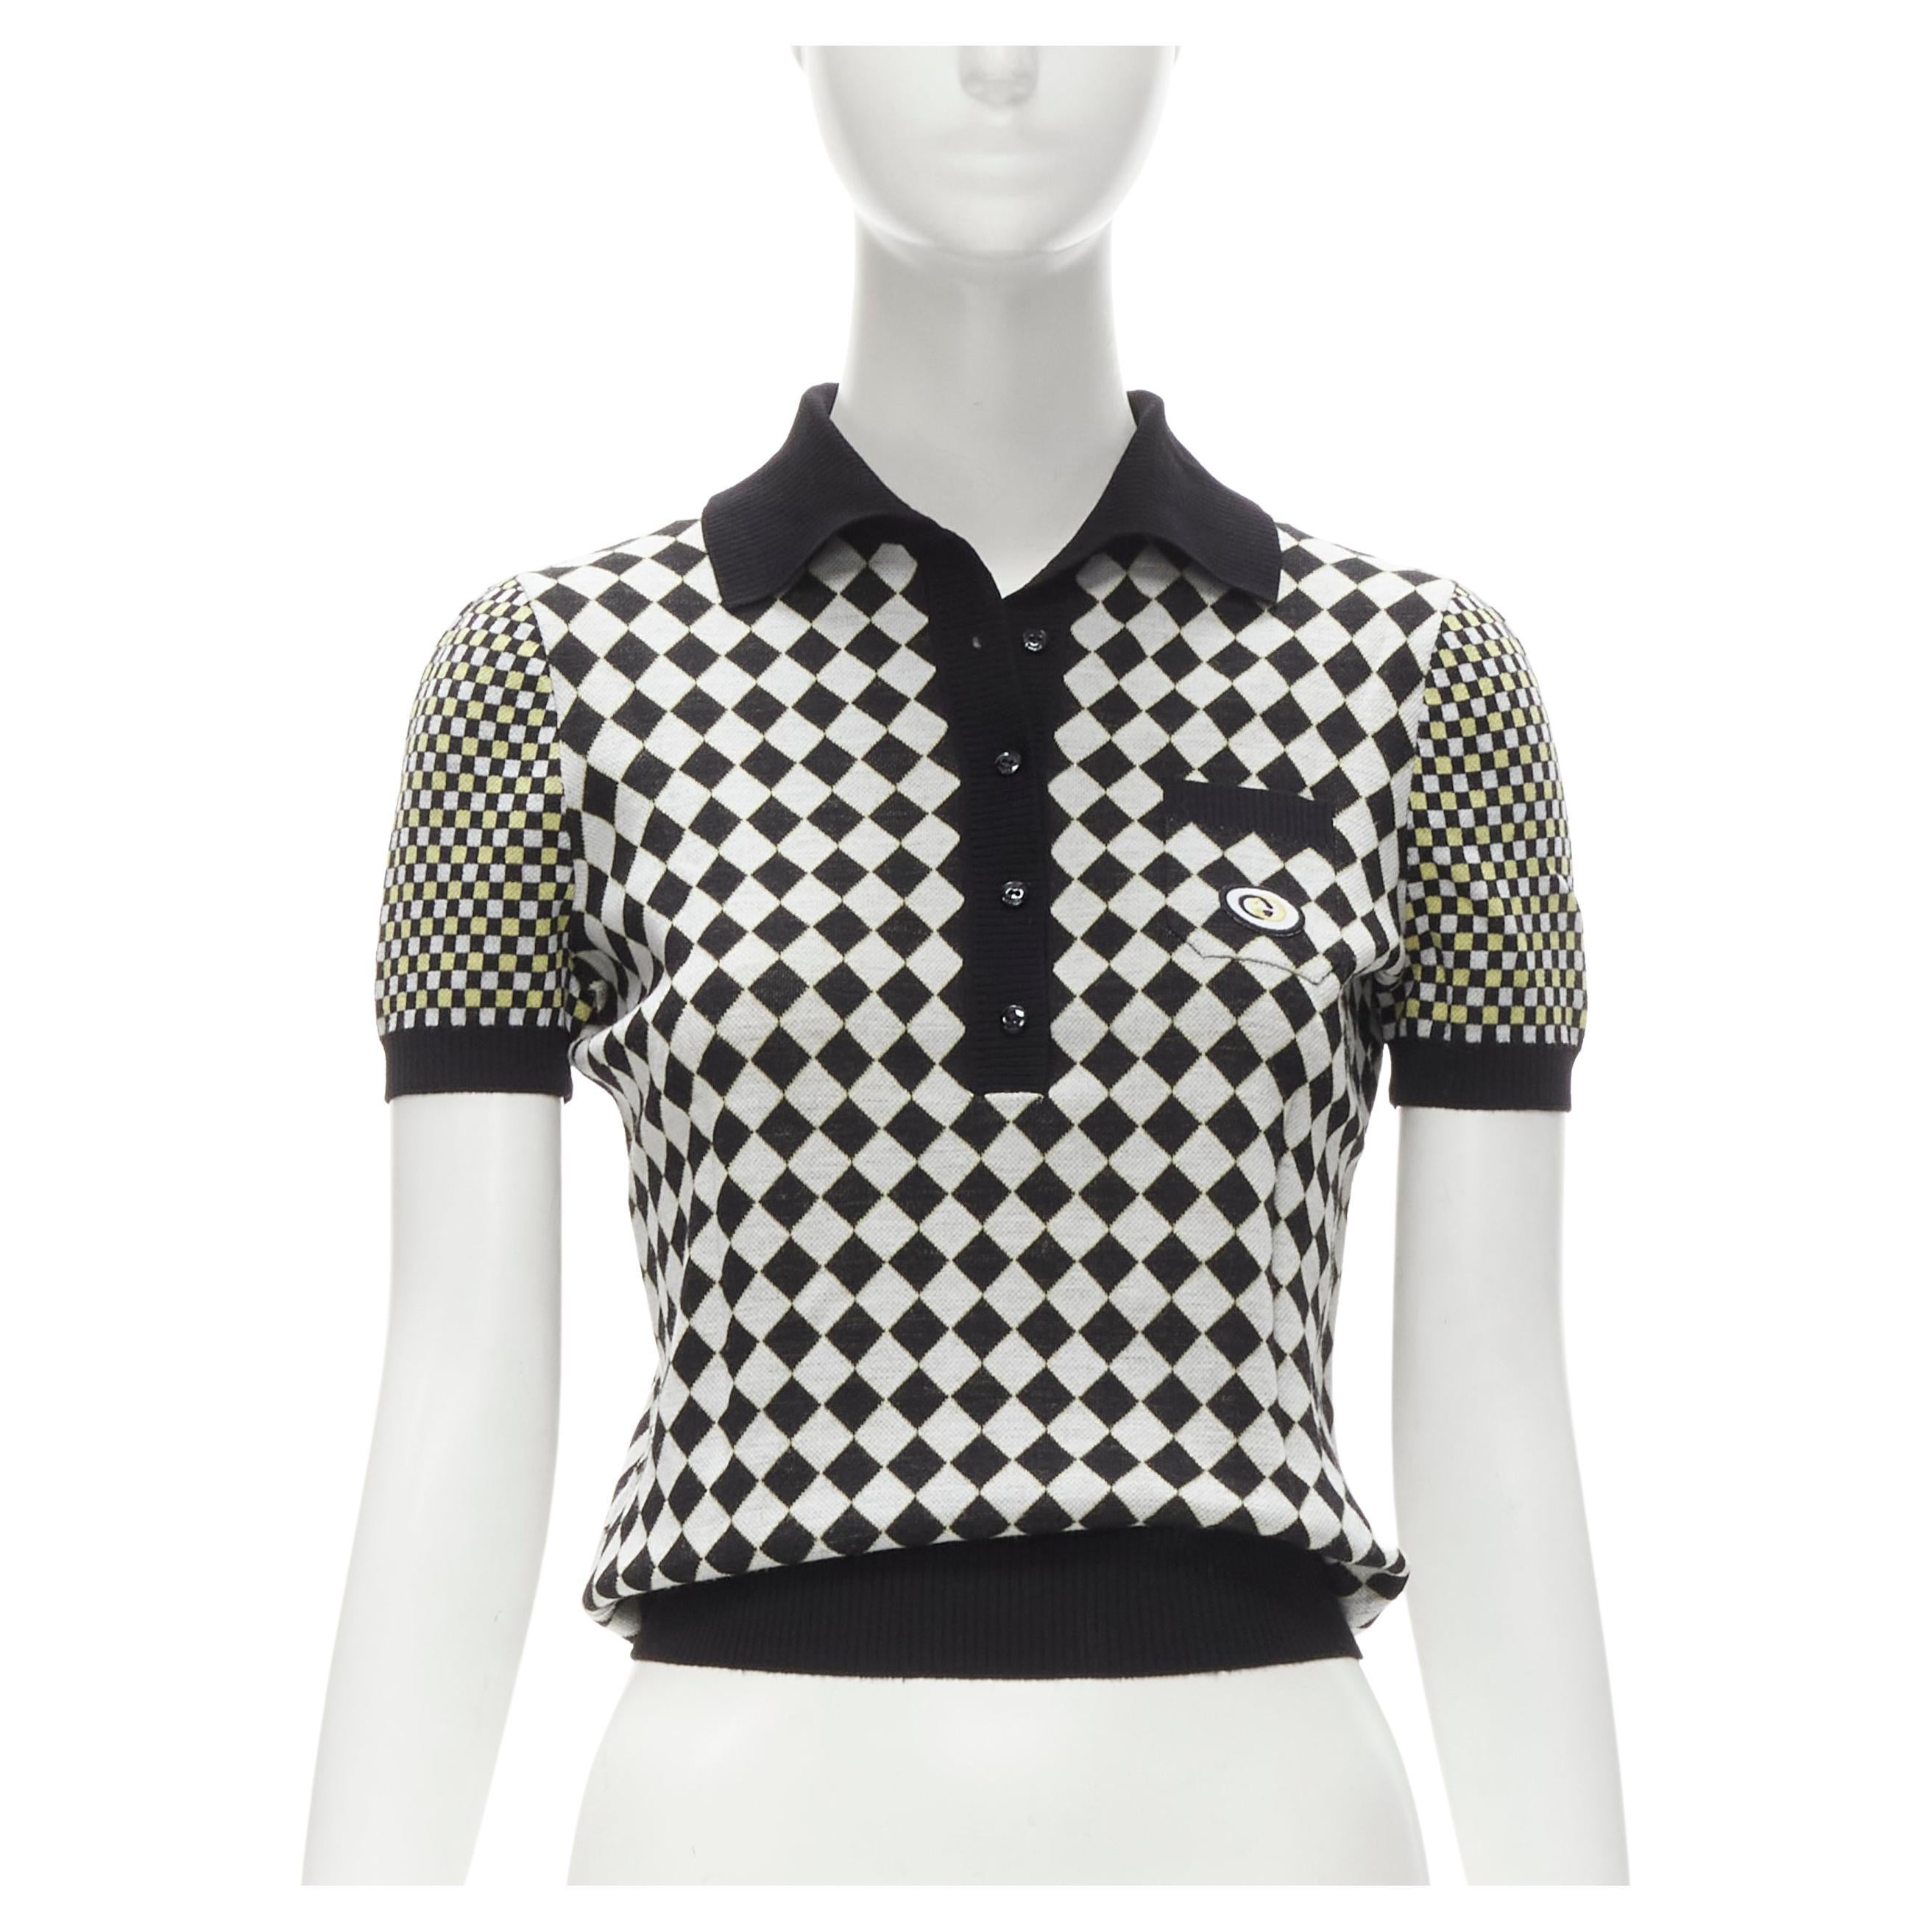 Authentic Black Damier Louis Vuitton Polo with Pocket Size M New With Tag